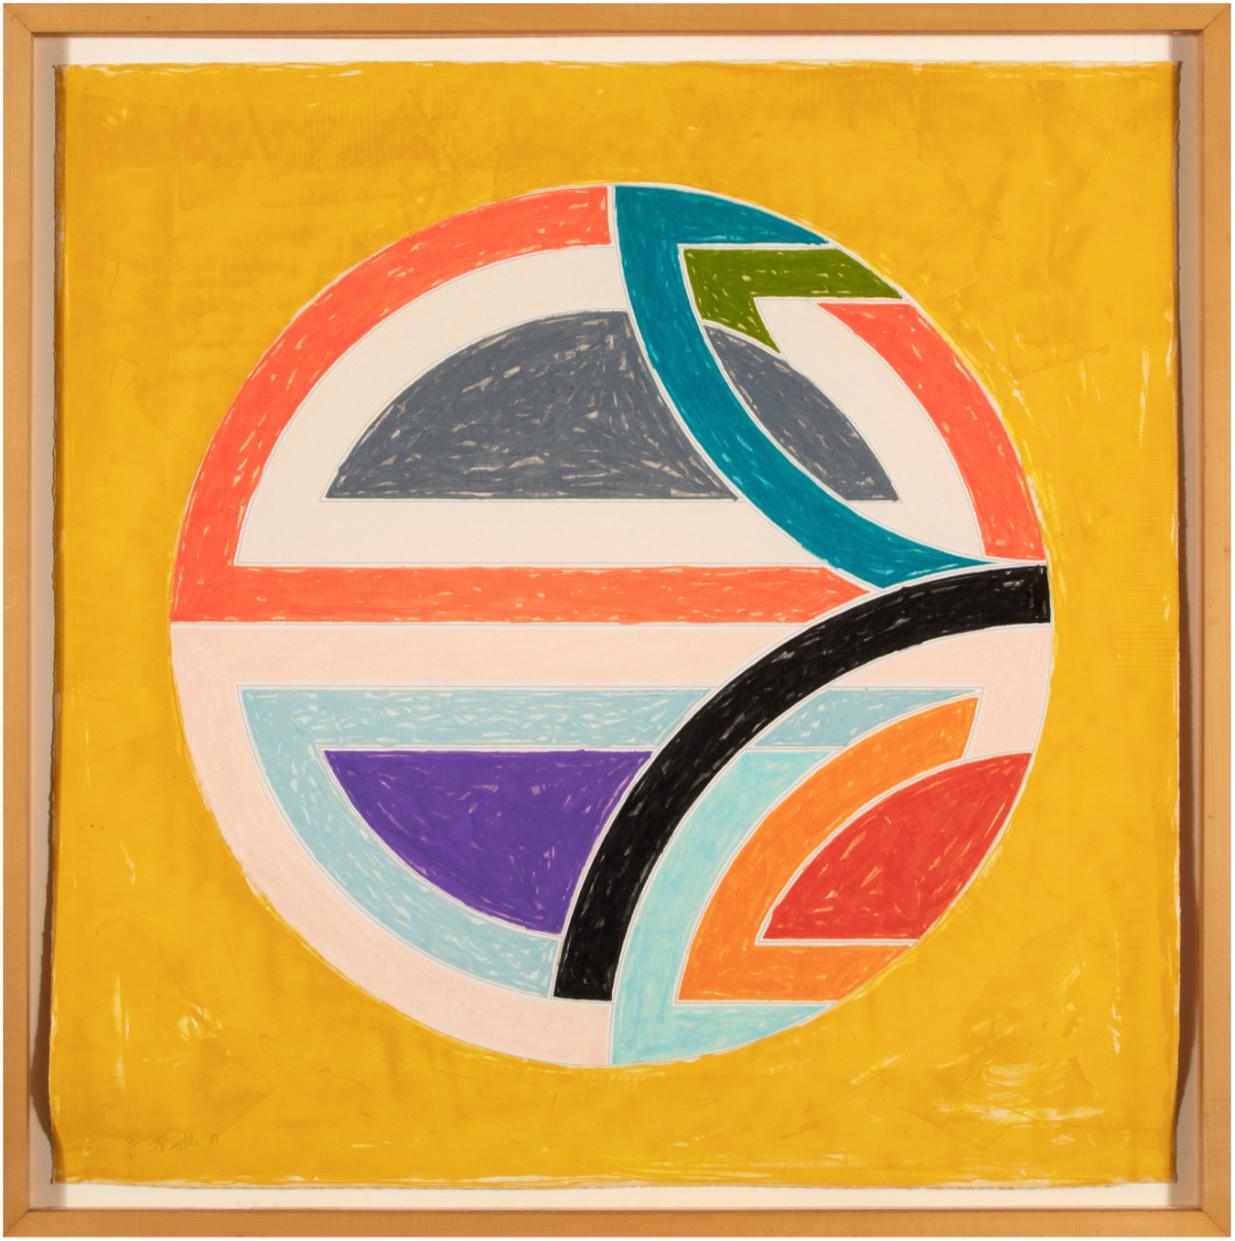 Frank Stella 'Sinjerli Variation Squared with Colored Ground Ia' Lithograph 1981 For Sale 1